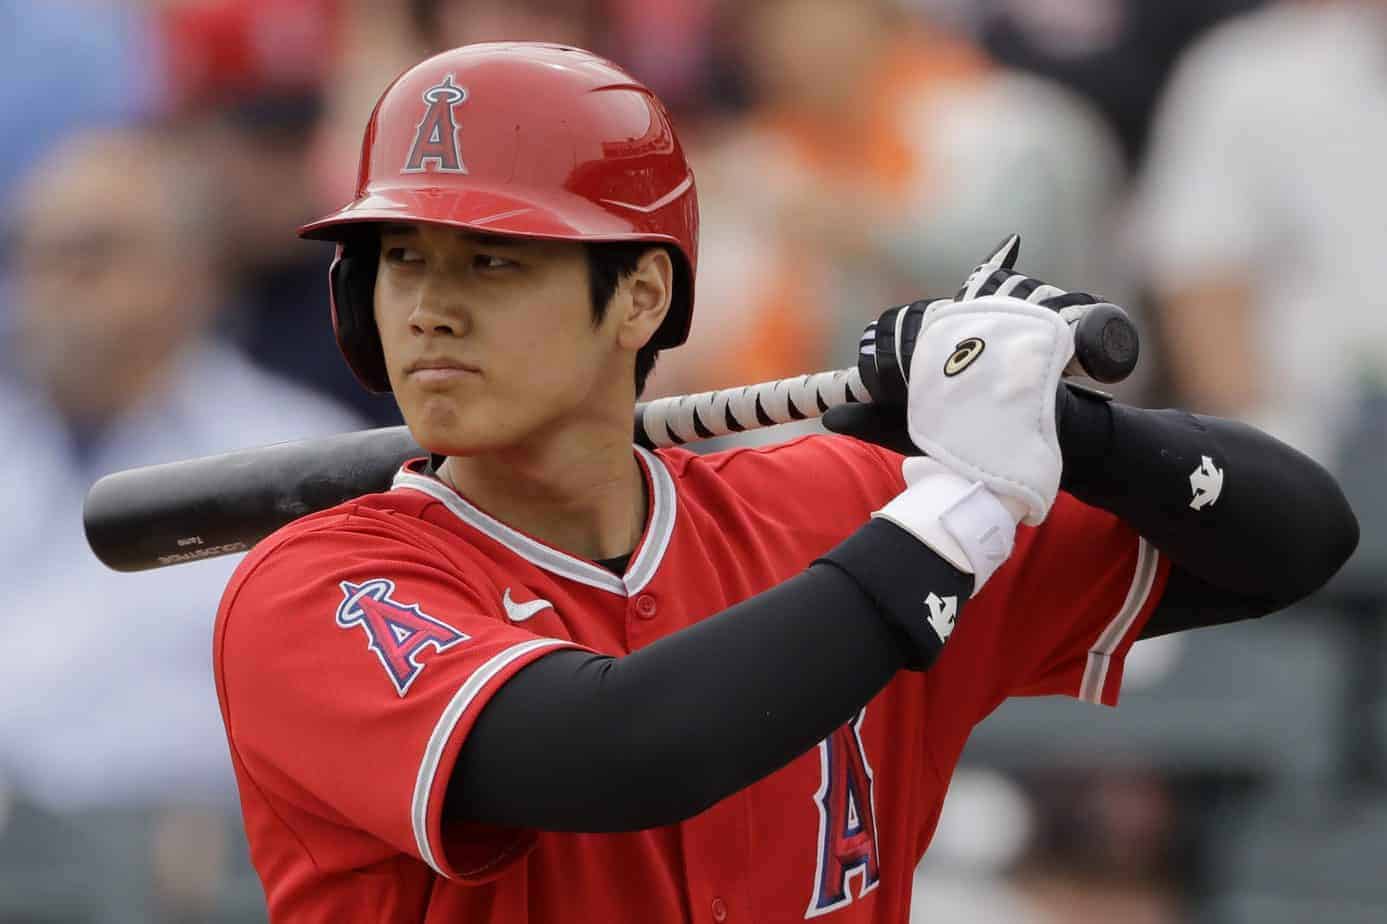 MLB DFS Picks on Deeper Dive & Live Before Lock. DraftKings and FanDuel daily fantasy baseball advice for Tuesday 8/31 w/ Shohei Ohtani.